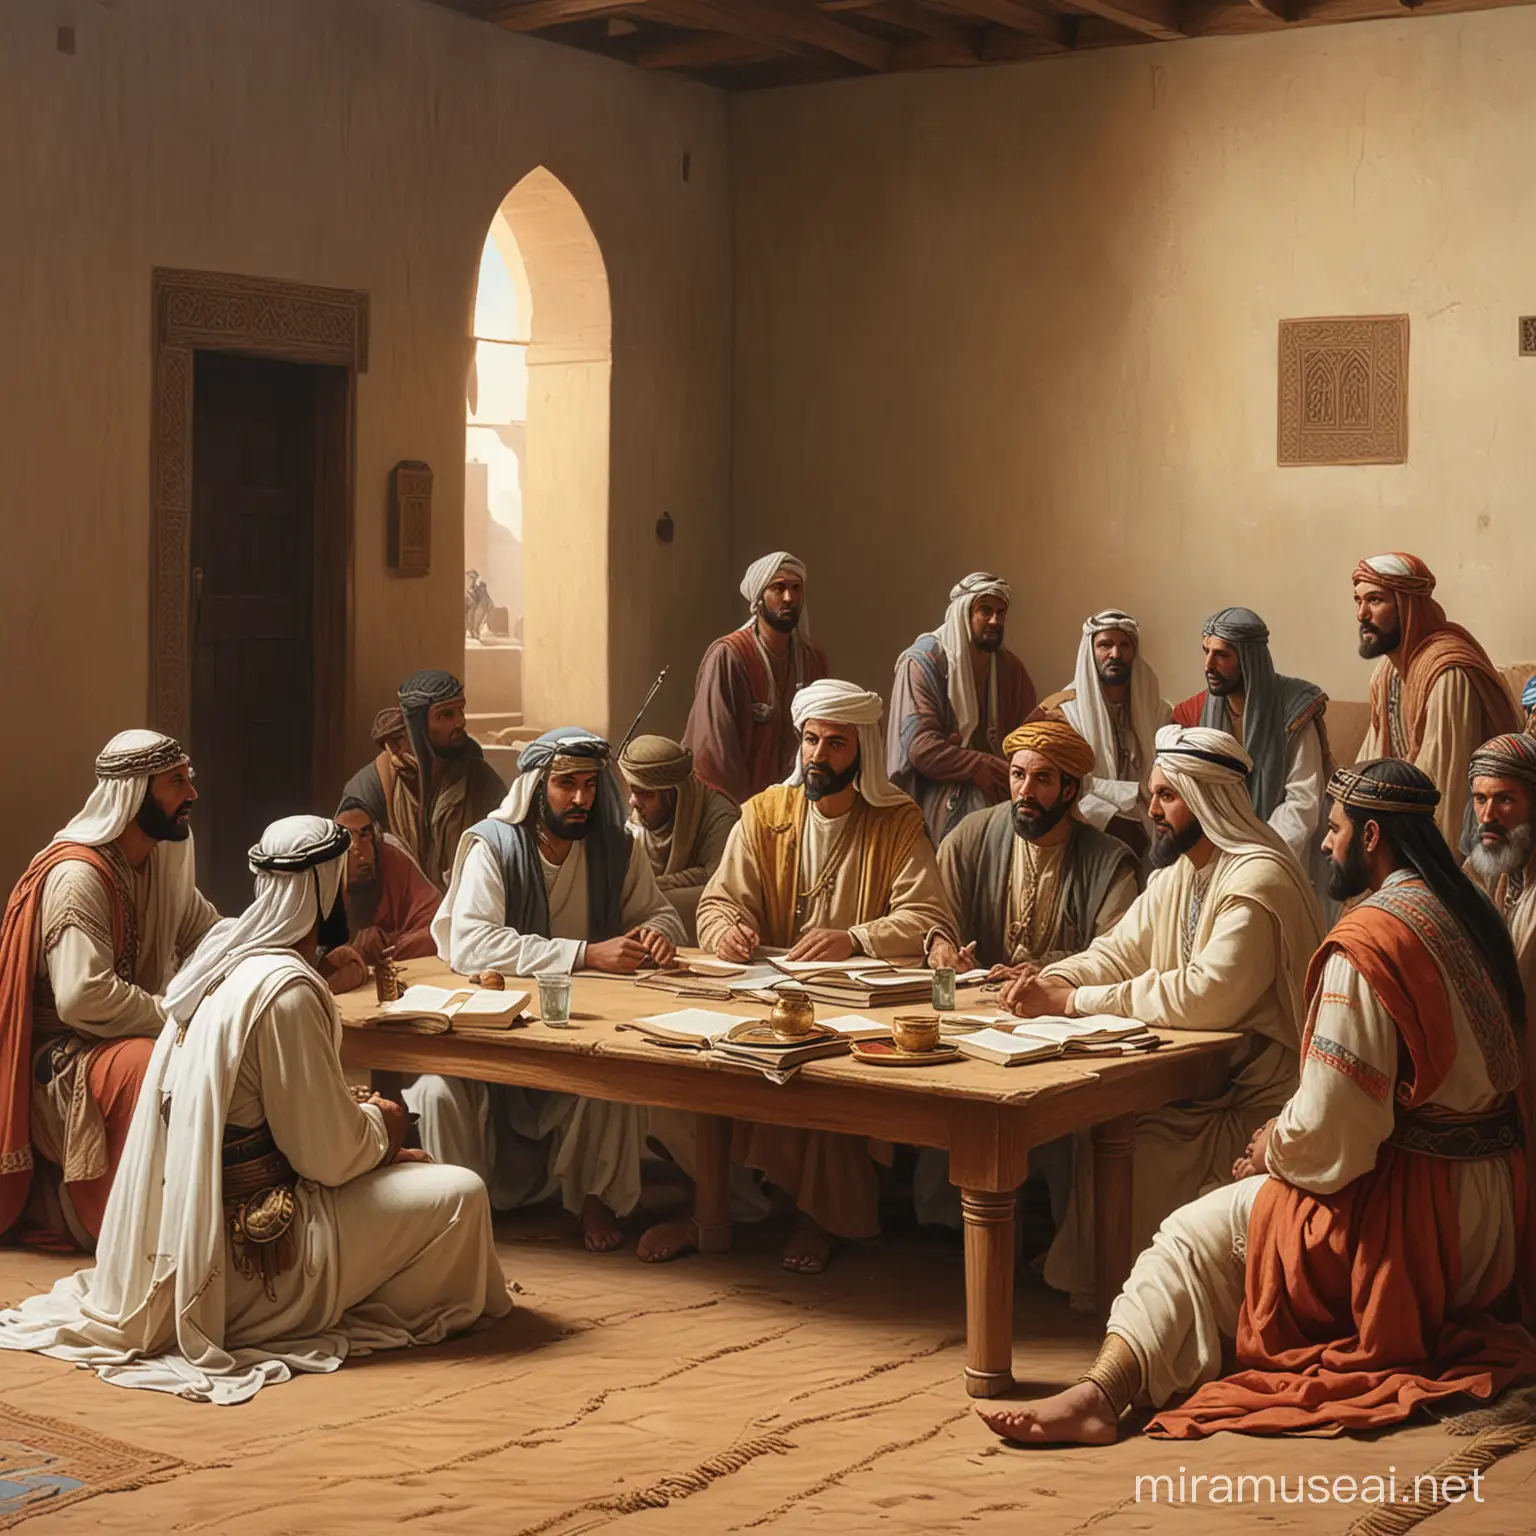 600AD Arabian meeting small group in room, in judging court


